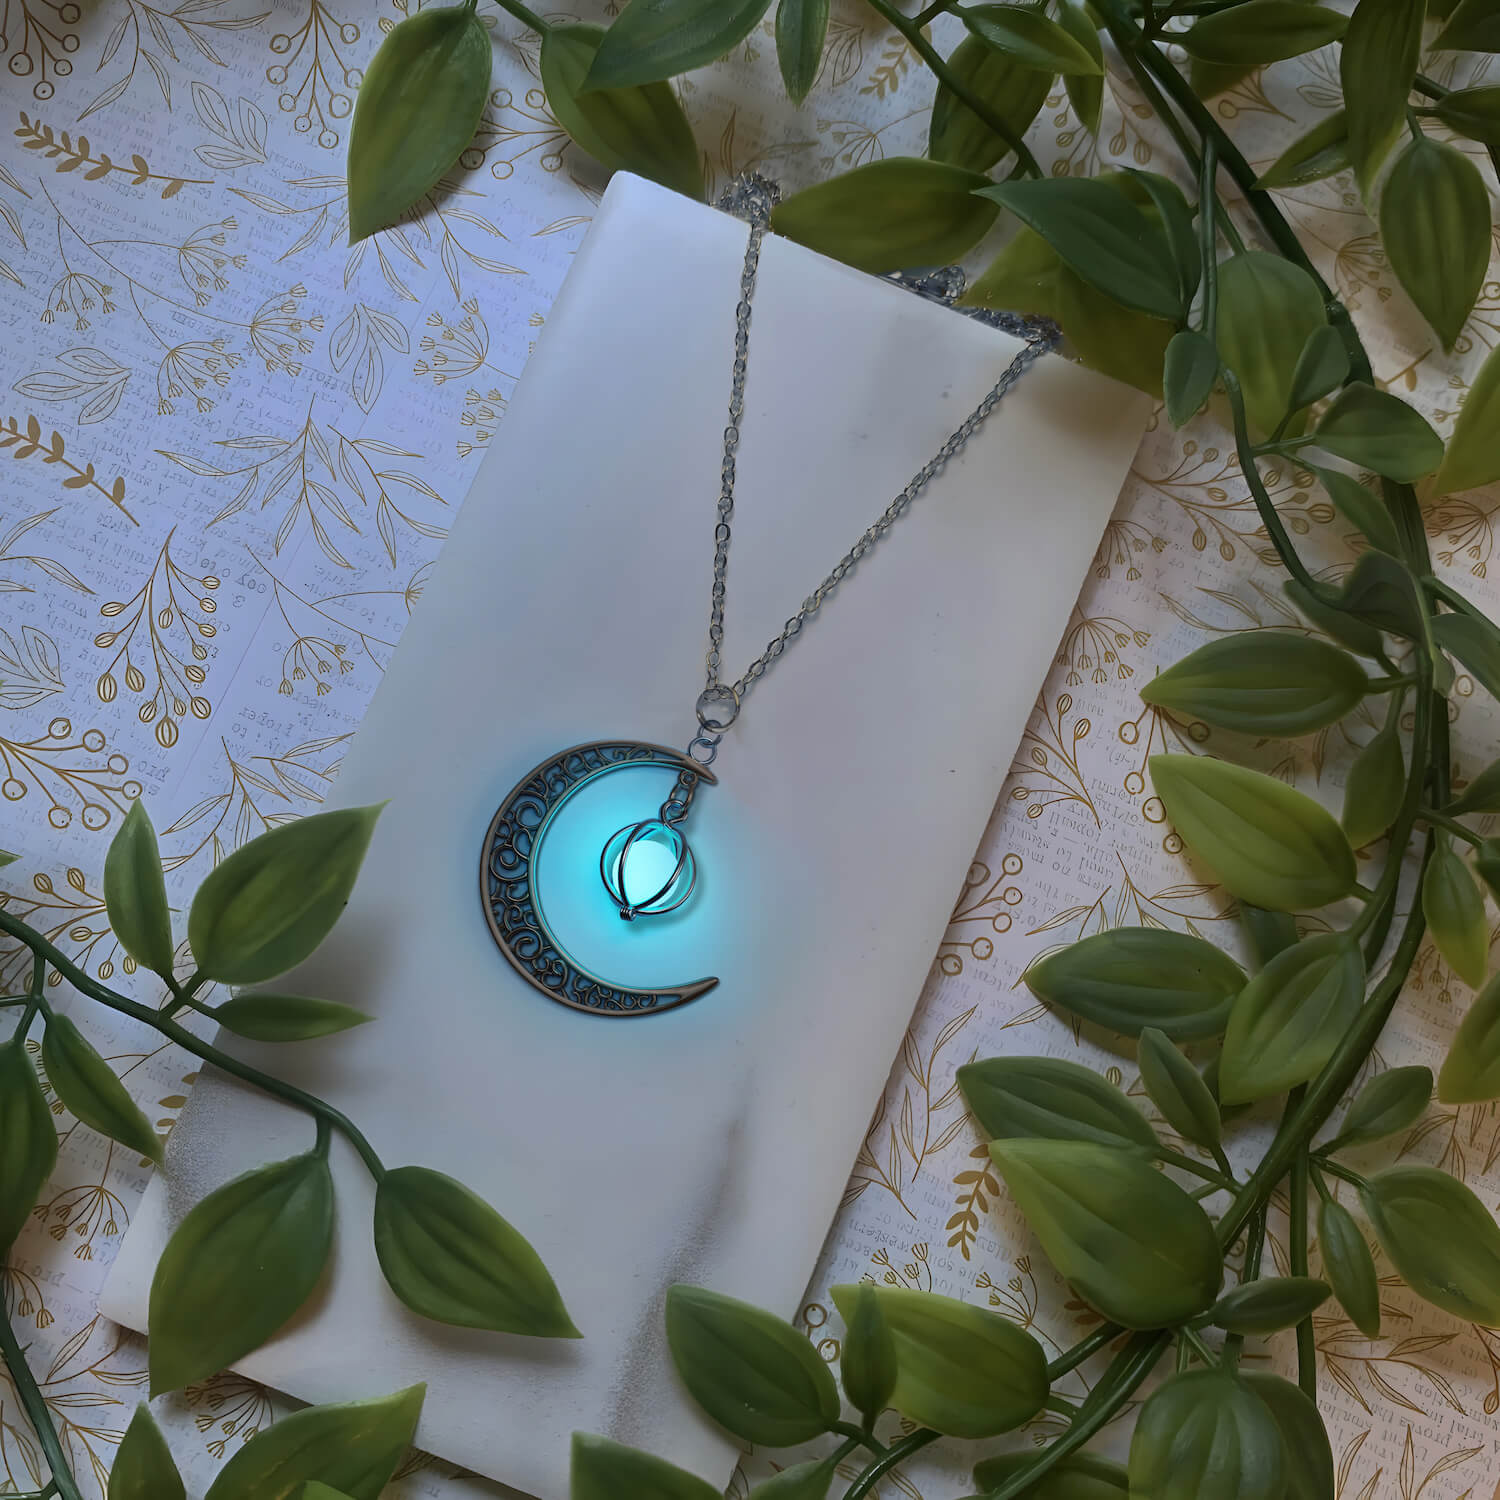 Enchanted Moonstone Necklace: Elegance with ethereal charm